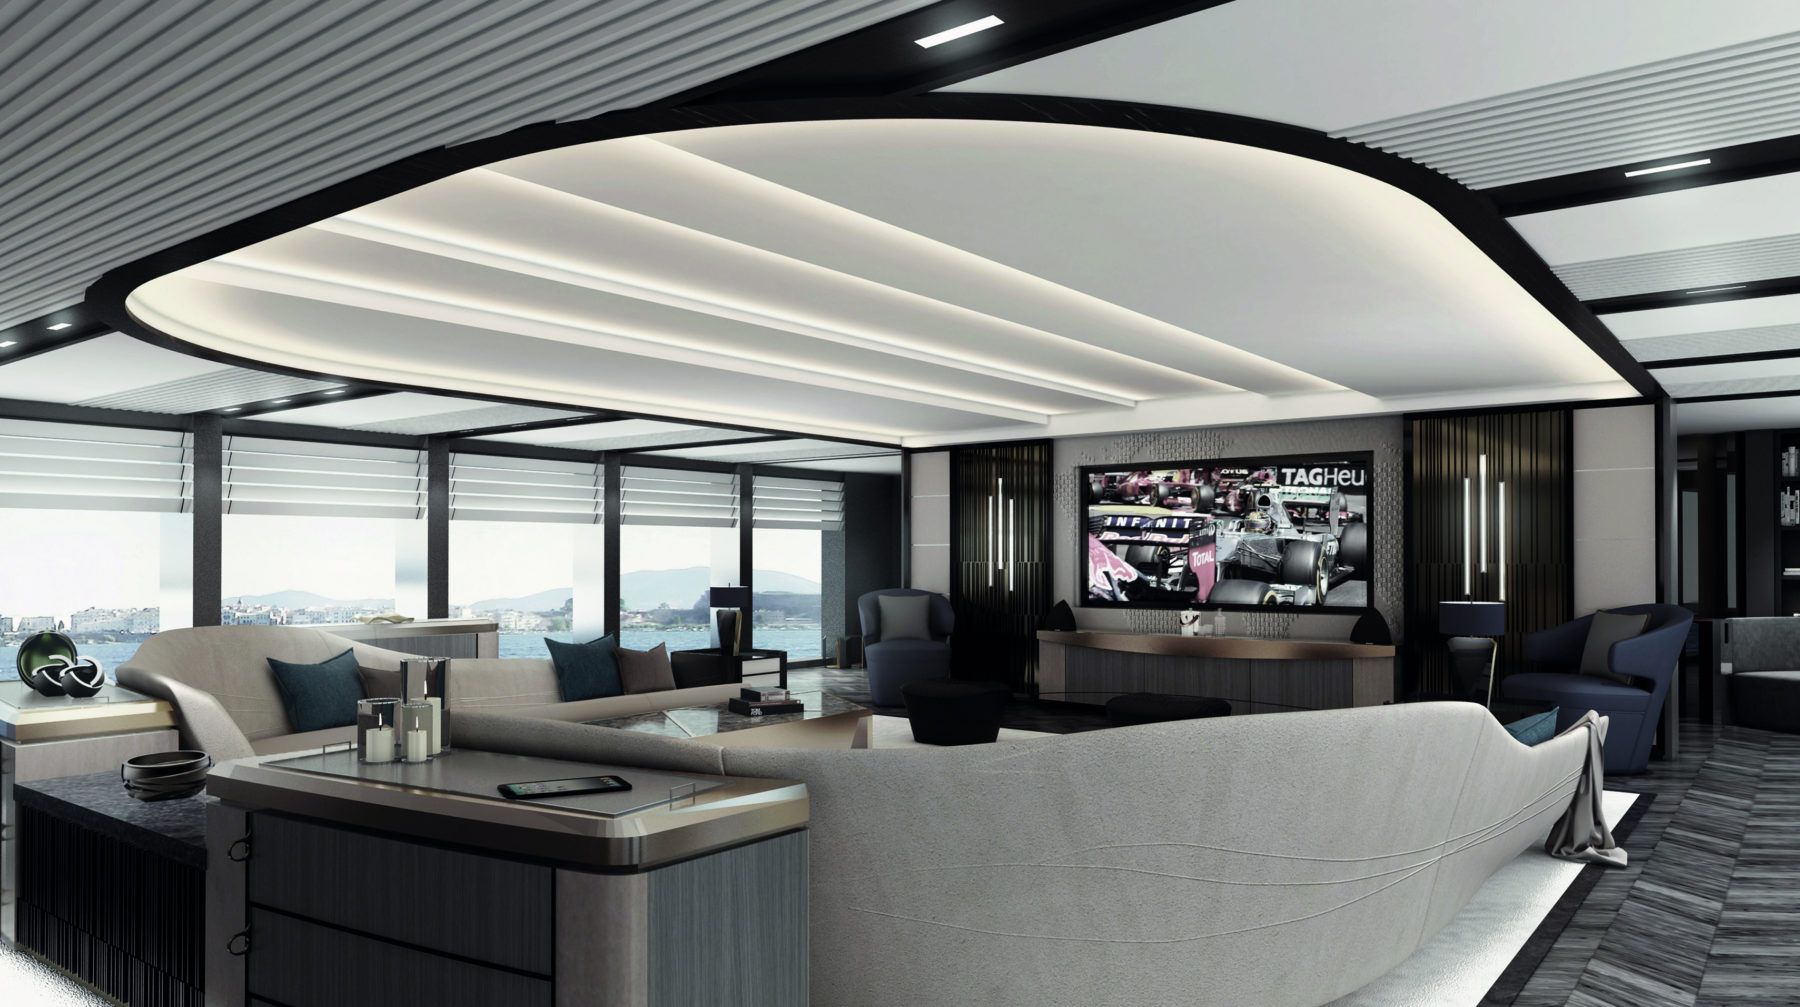 March and White yacht interior design